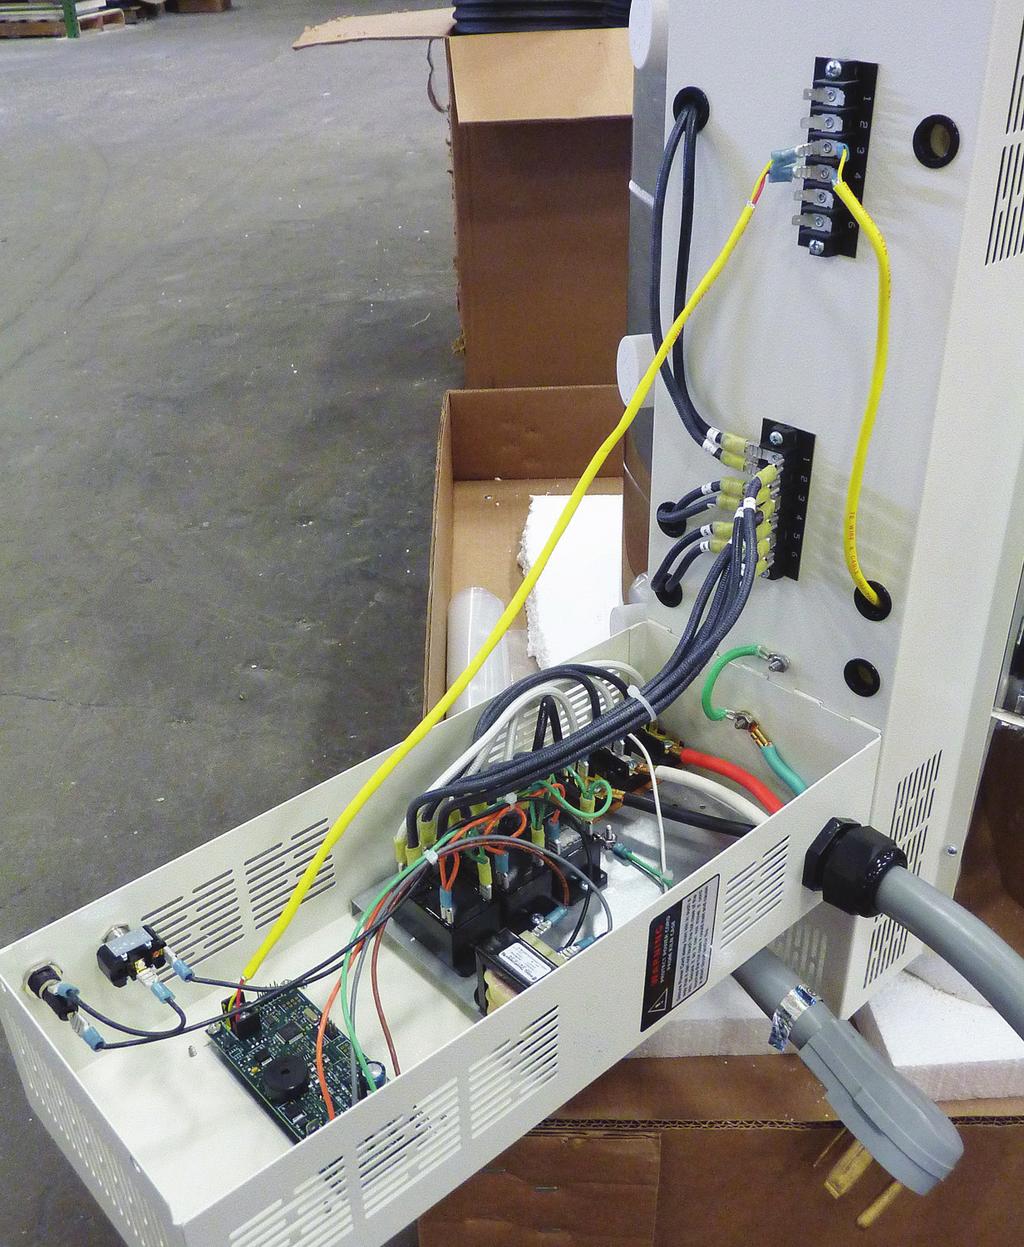 Photo of a 3-phase control panel for a three section School-Master kiln L-G-TRTC/EF Thermocouple Terminal Strip S-S-SCBX/03 Element Cover Box L-G-HETP/PR Power Element Lead Wires (Top Zone)